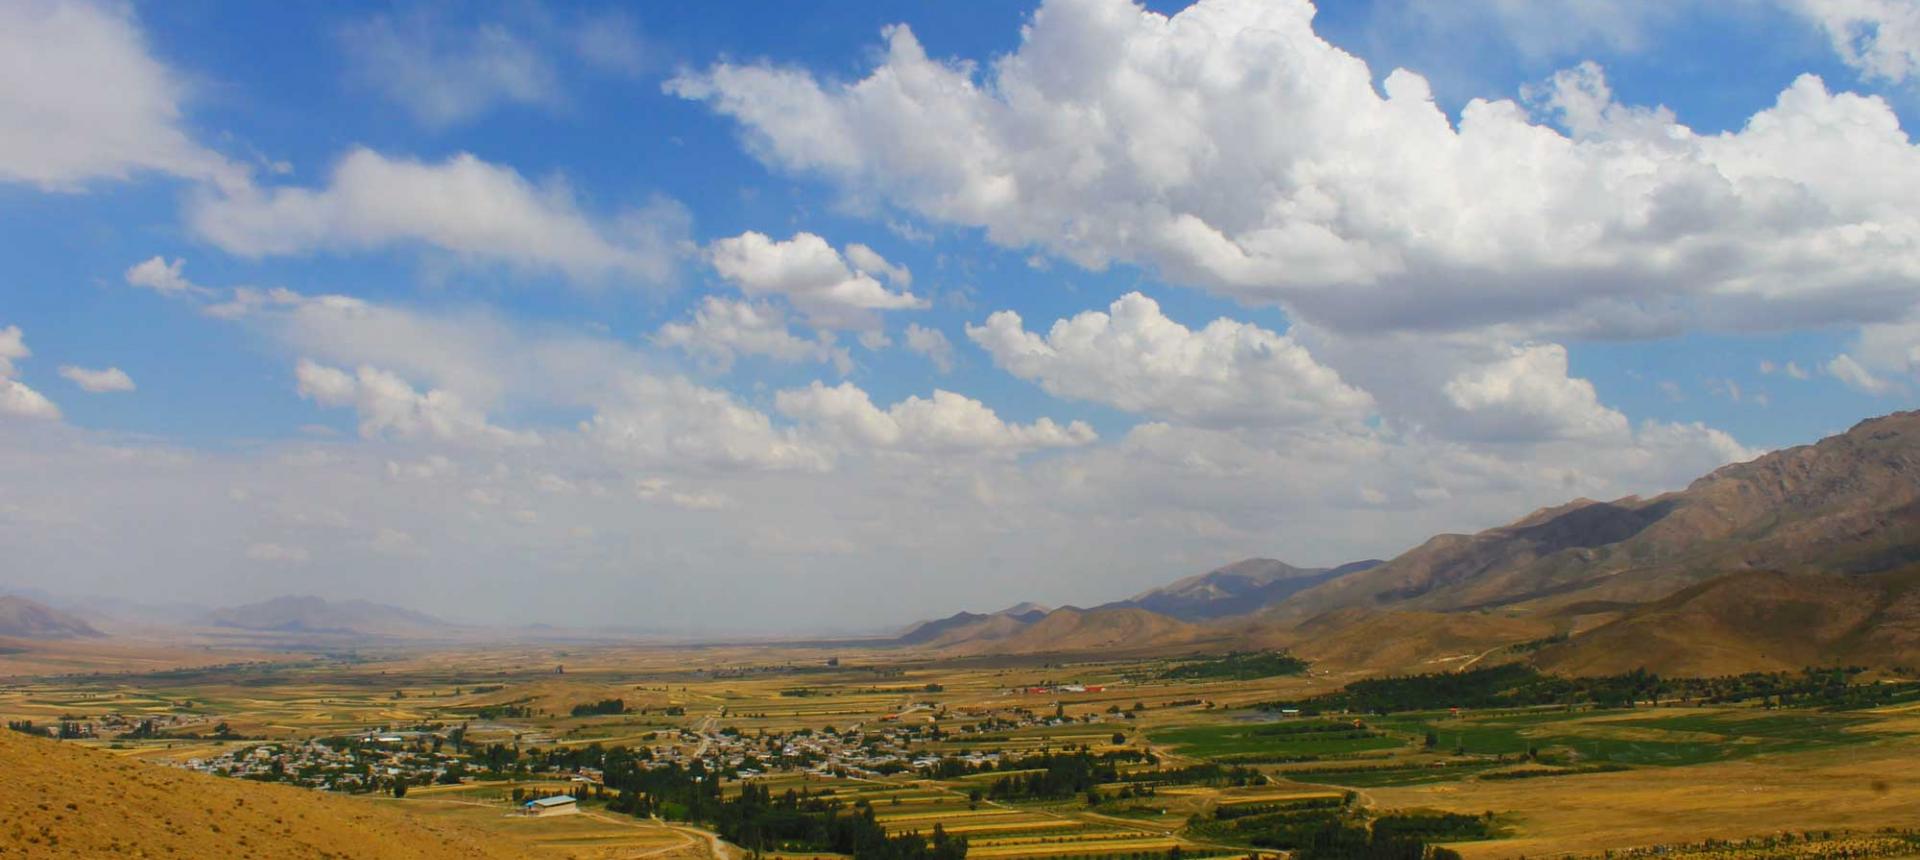 Valley scene with sky and clouds